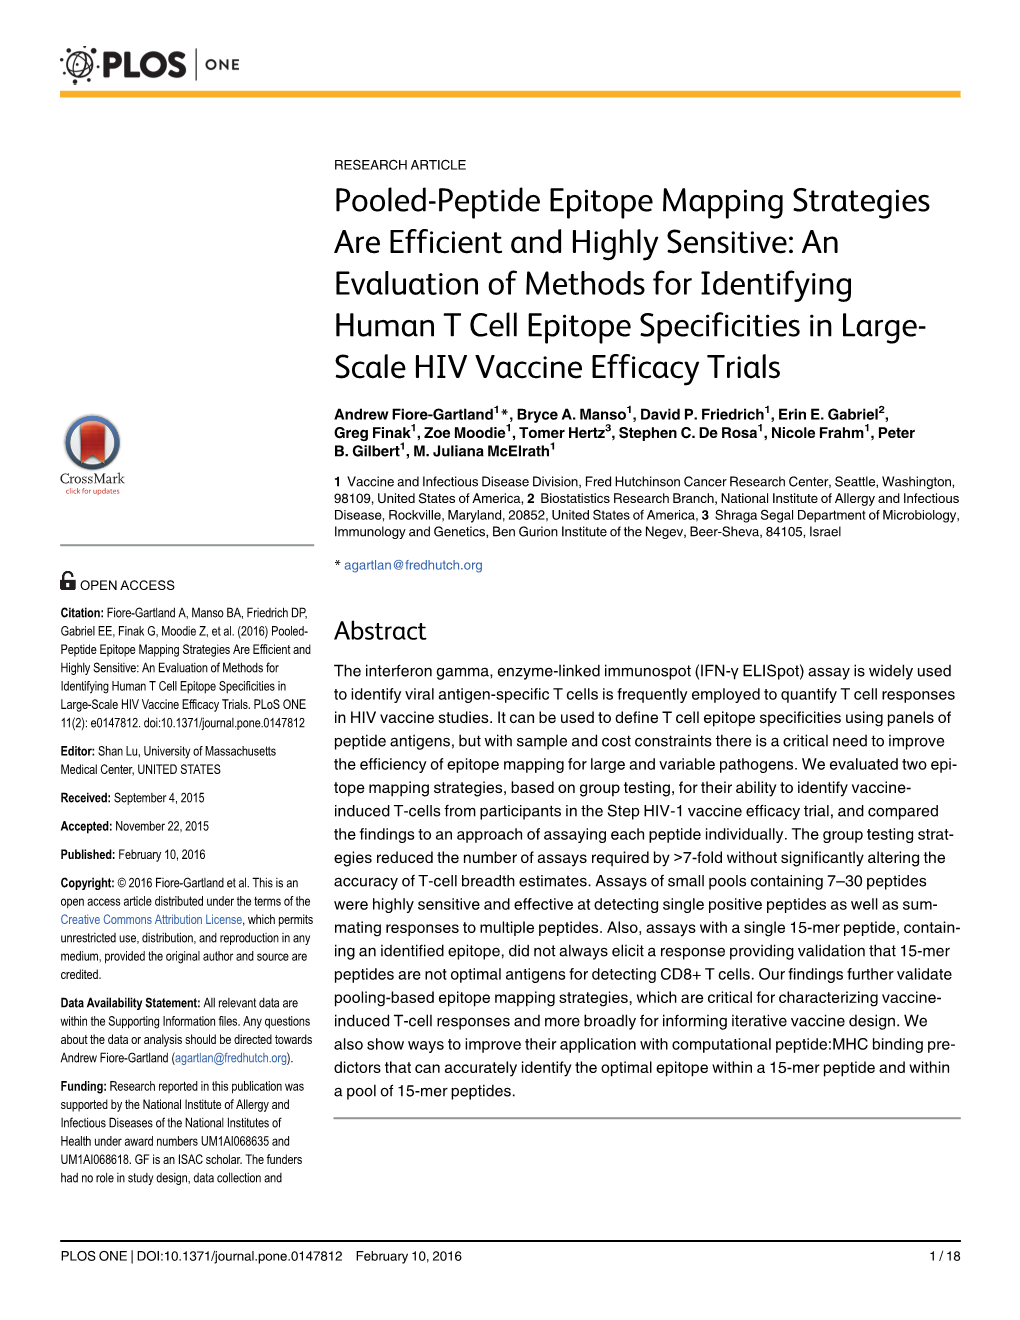 Pooled-Peptide Epitope Mapping Strategies Are Efficient and Highly Sensitive